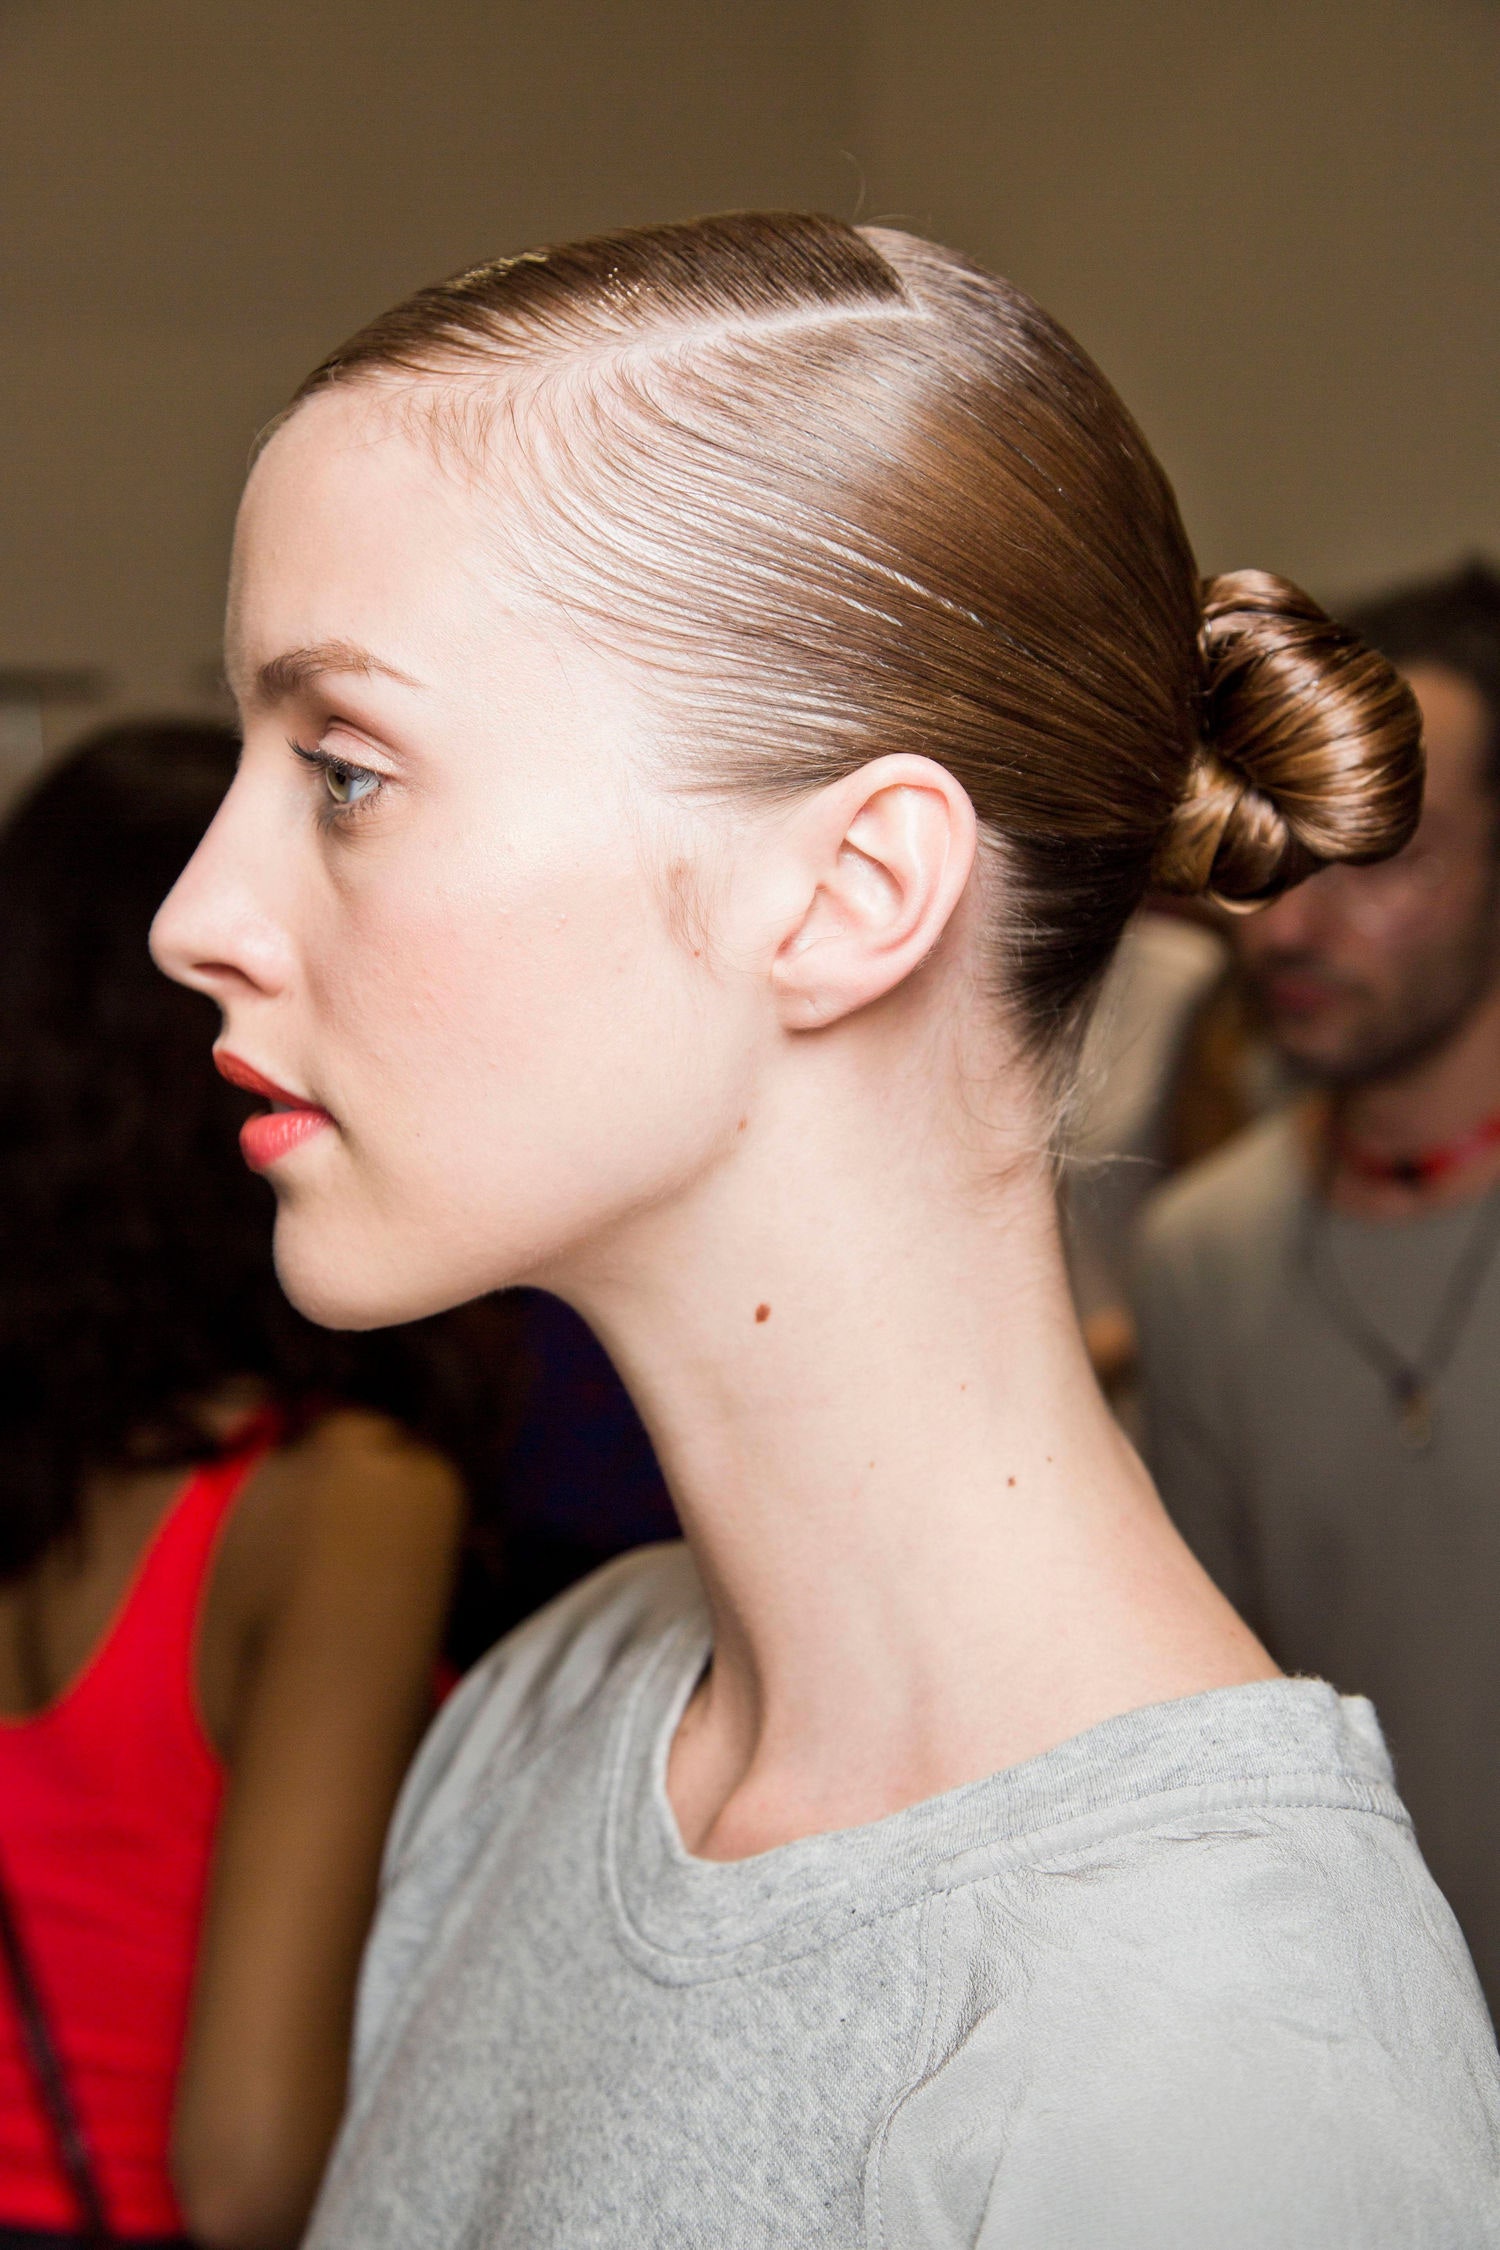 Sleek Hairstyles That Will Make You Look Elegant And Sophisticated This Summer All For Fashion